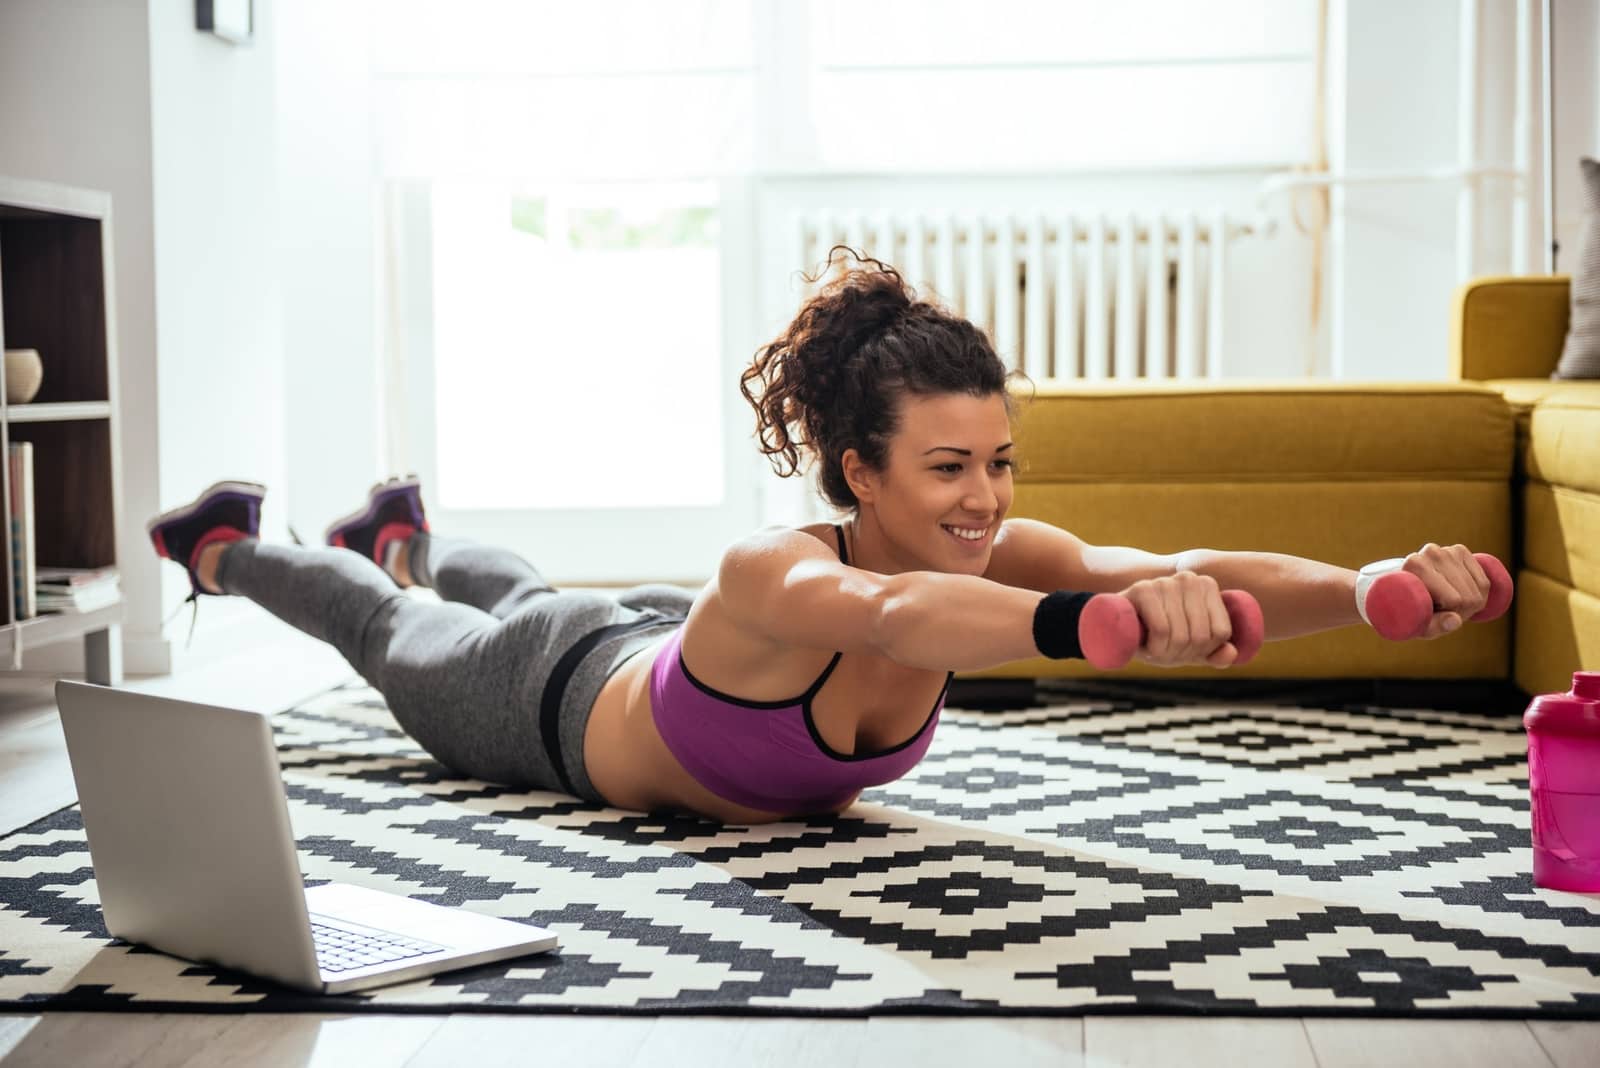 The Best Fat-Burning Exercises for at Home and the Gym